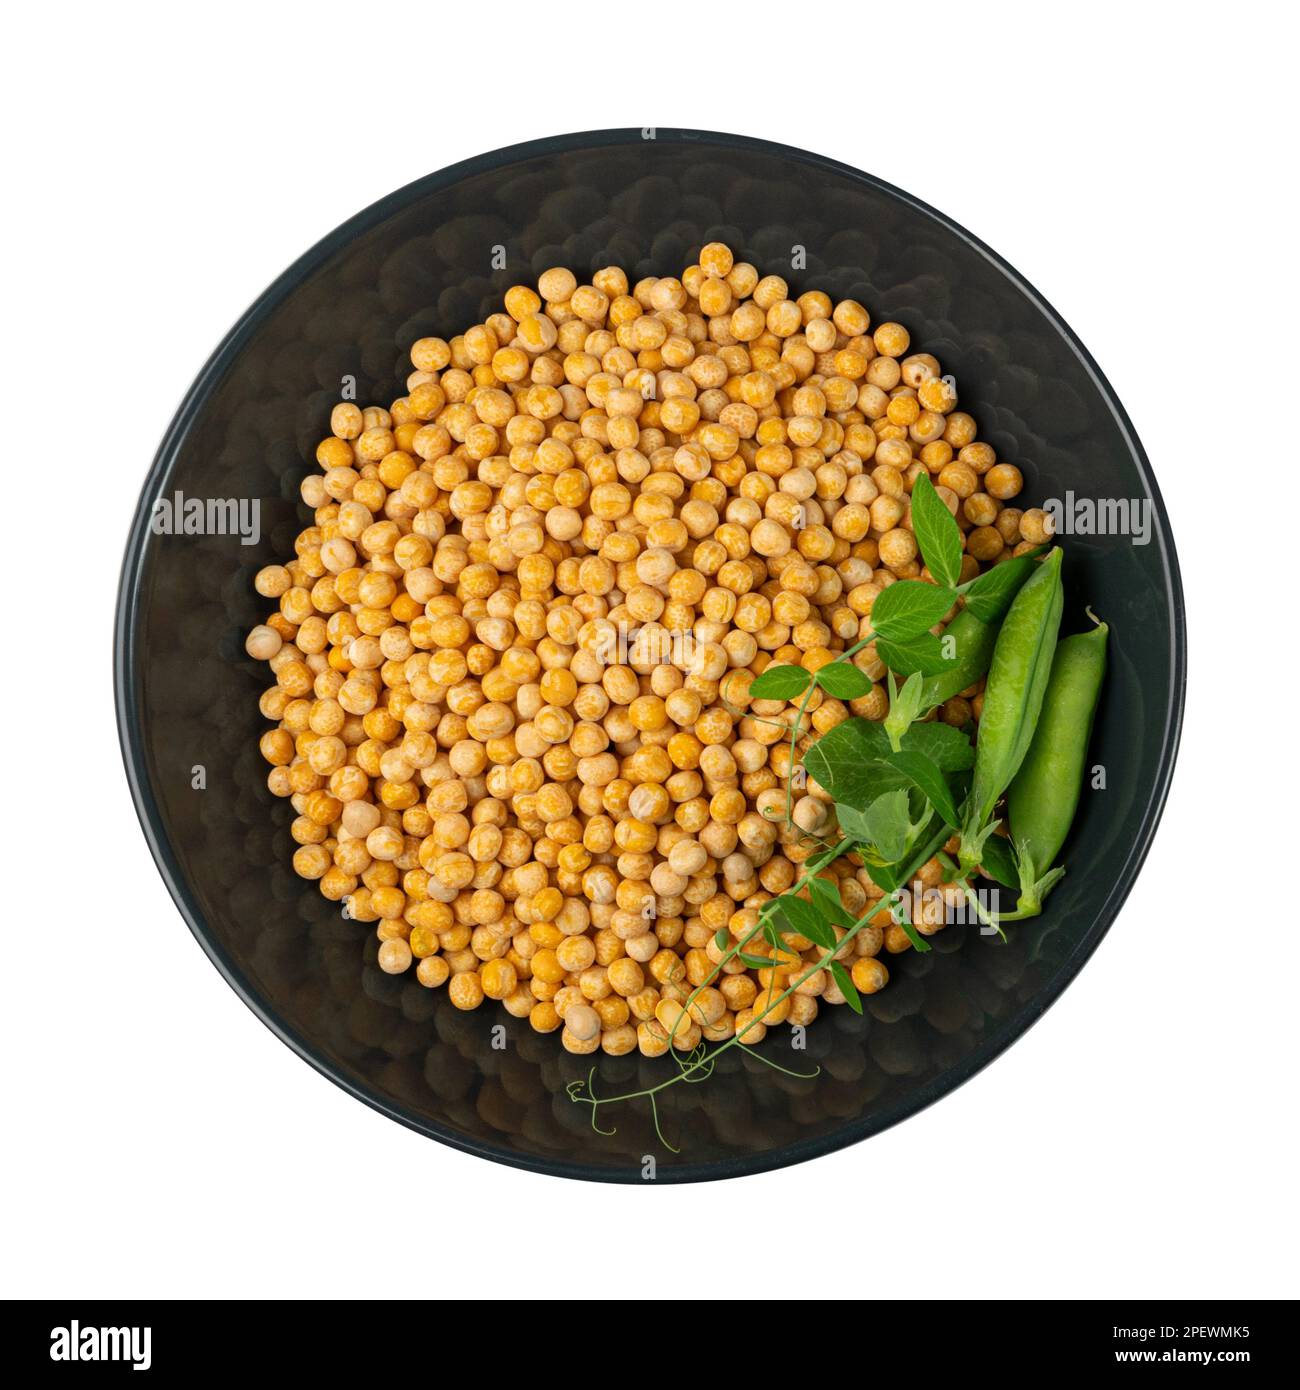 Dry Yellow Peas Isolated, Whole Pea Pile, Raw Legume, Protein Source, Healthy Vegan Food, Dry Yellow Peas on White Background Stock Photo